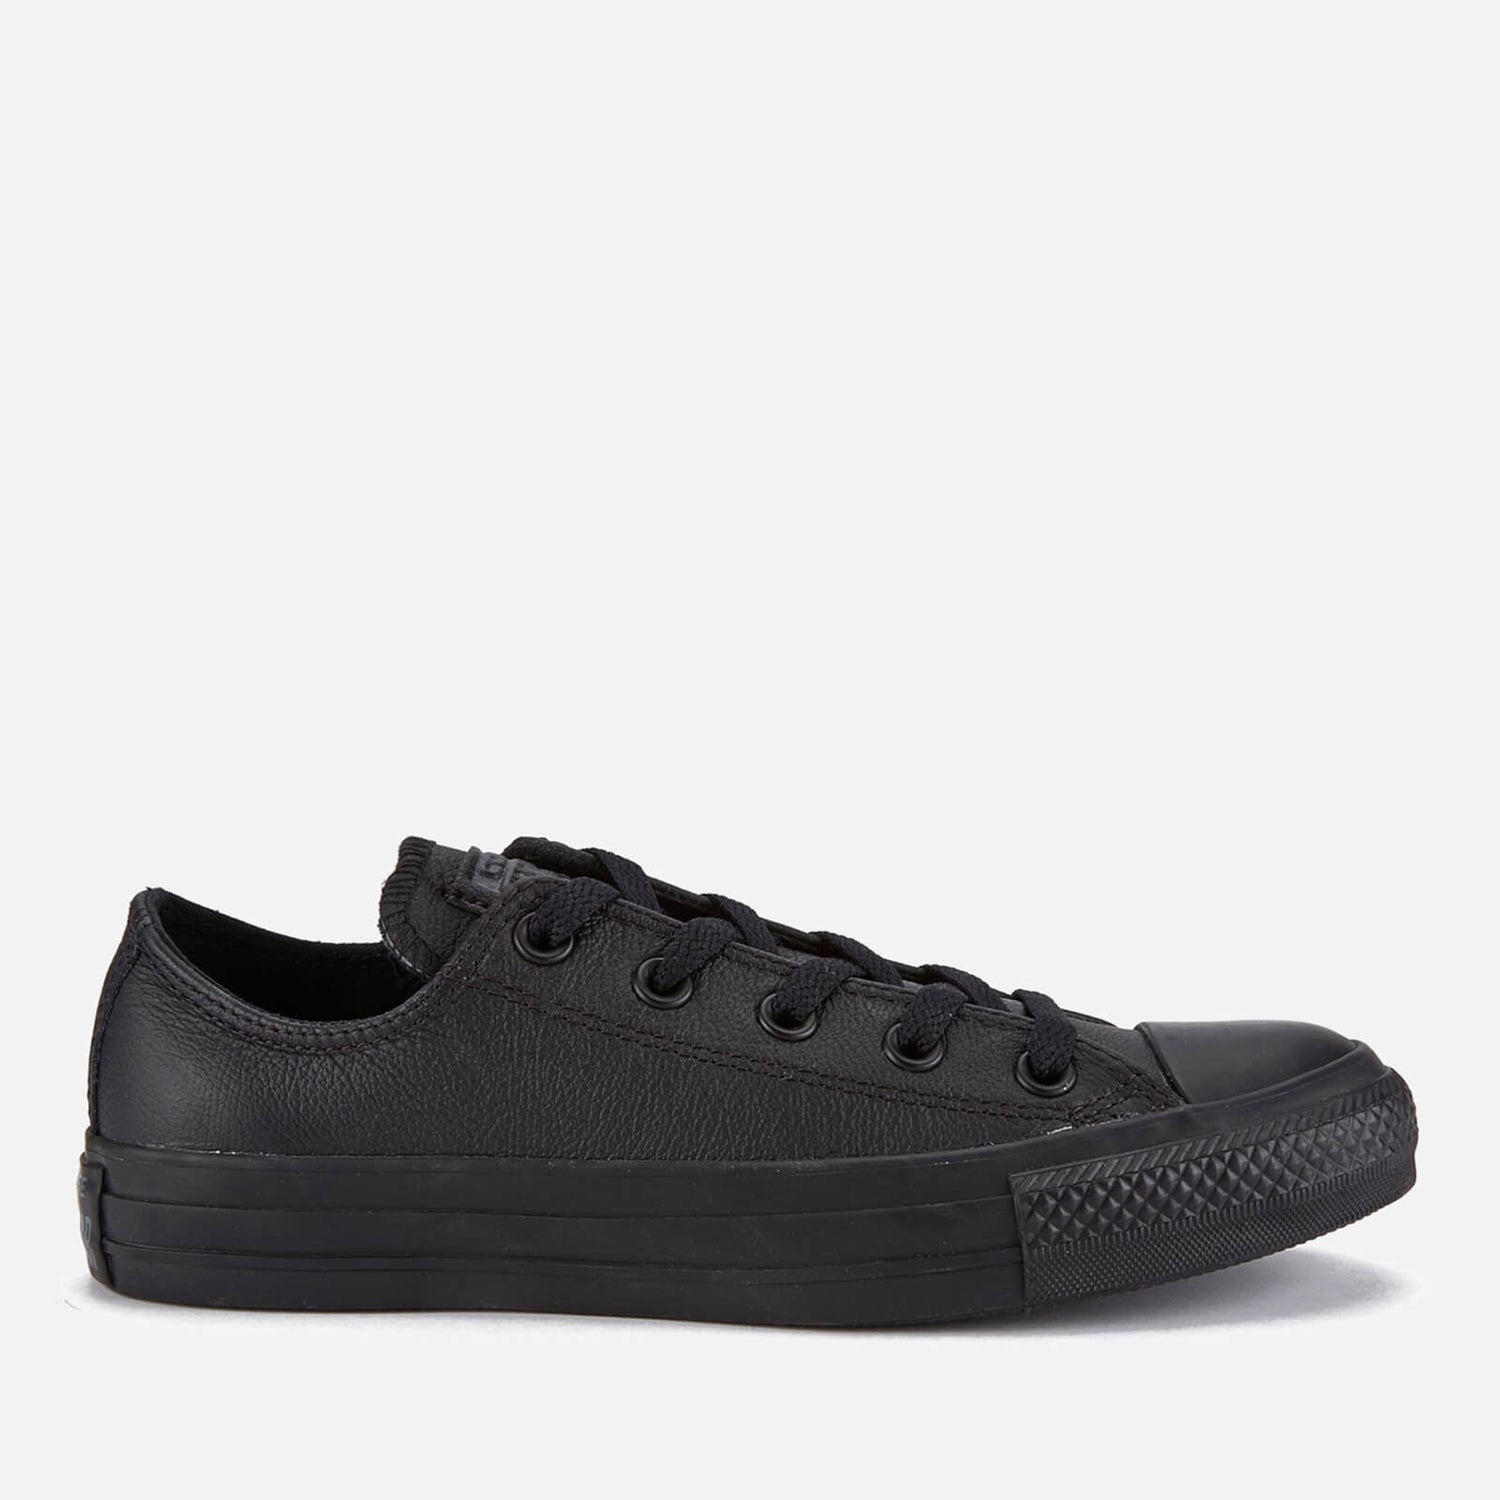 Converse Chuck Taylor All Star Ox Trainers - Black Mono - UK 3